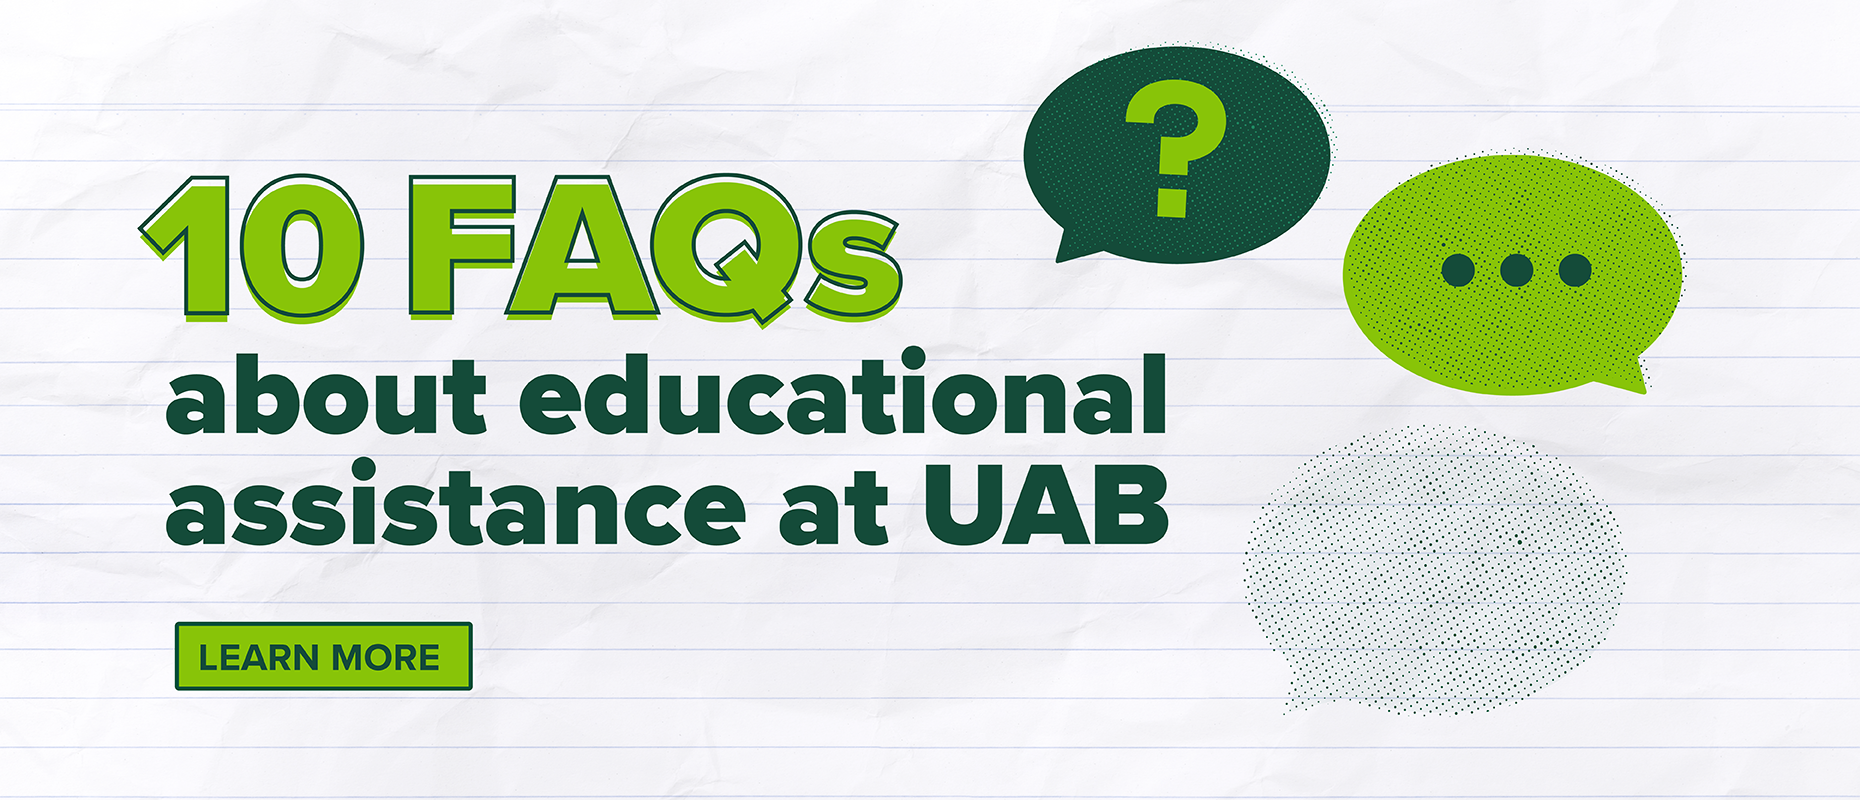 10 Frequently Asked Questions about educational assistance at UAB